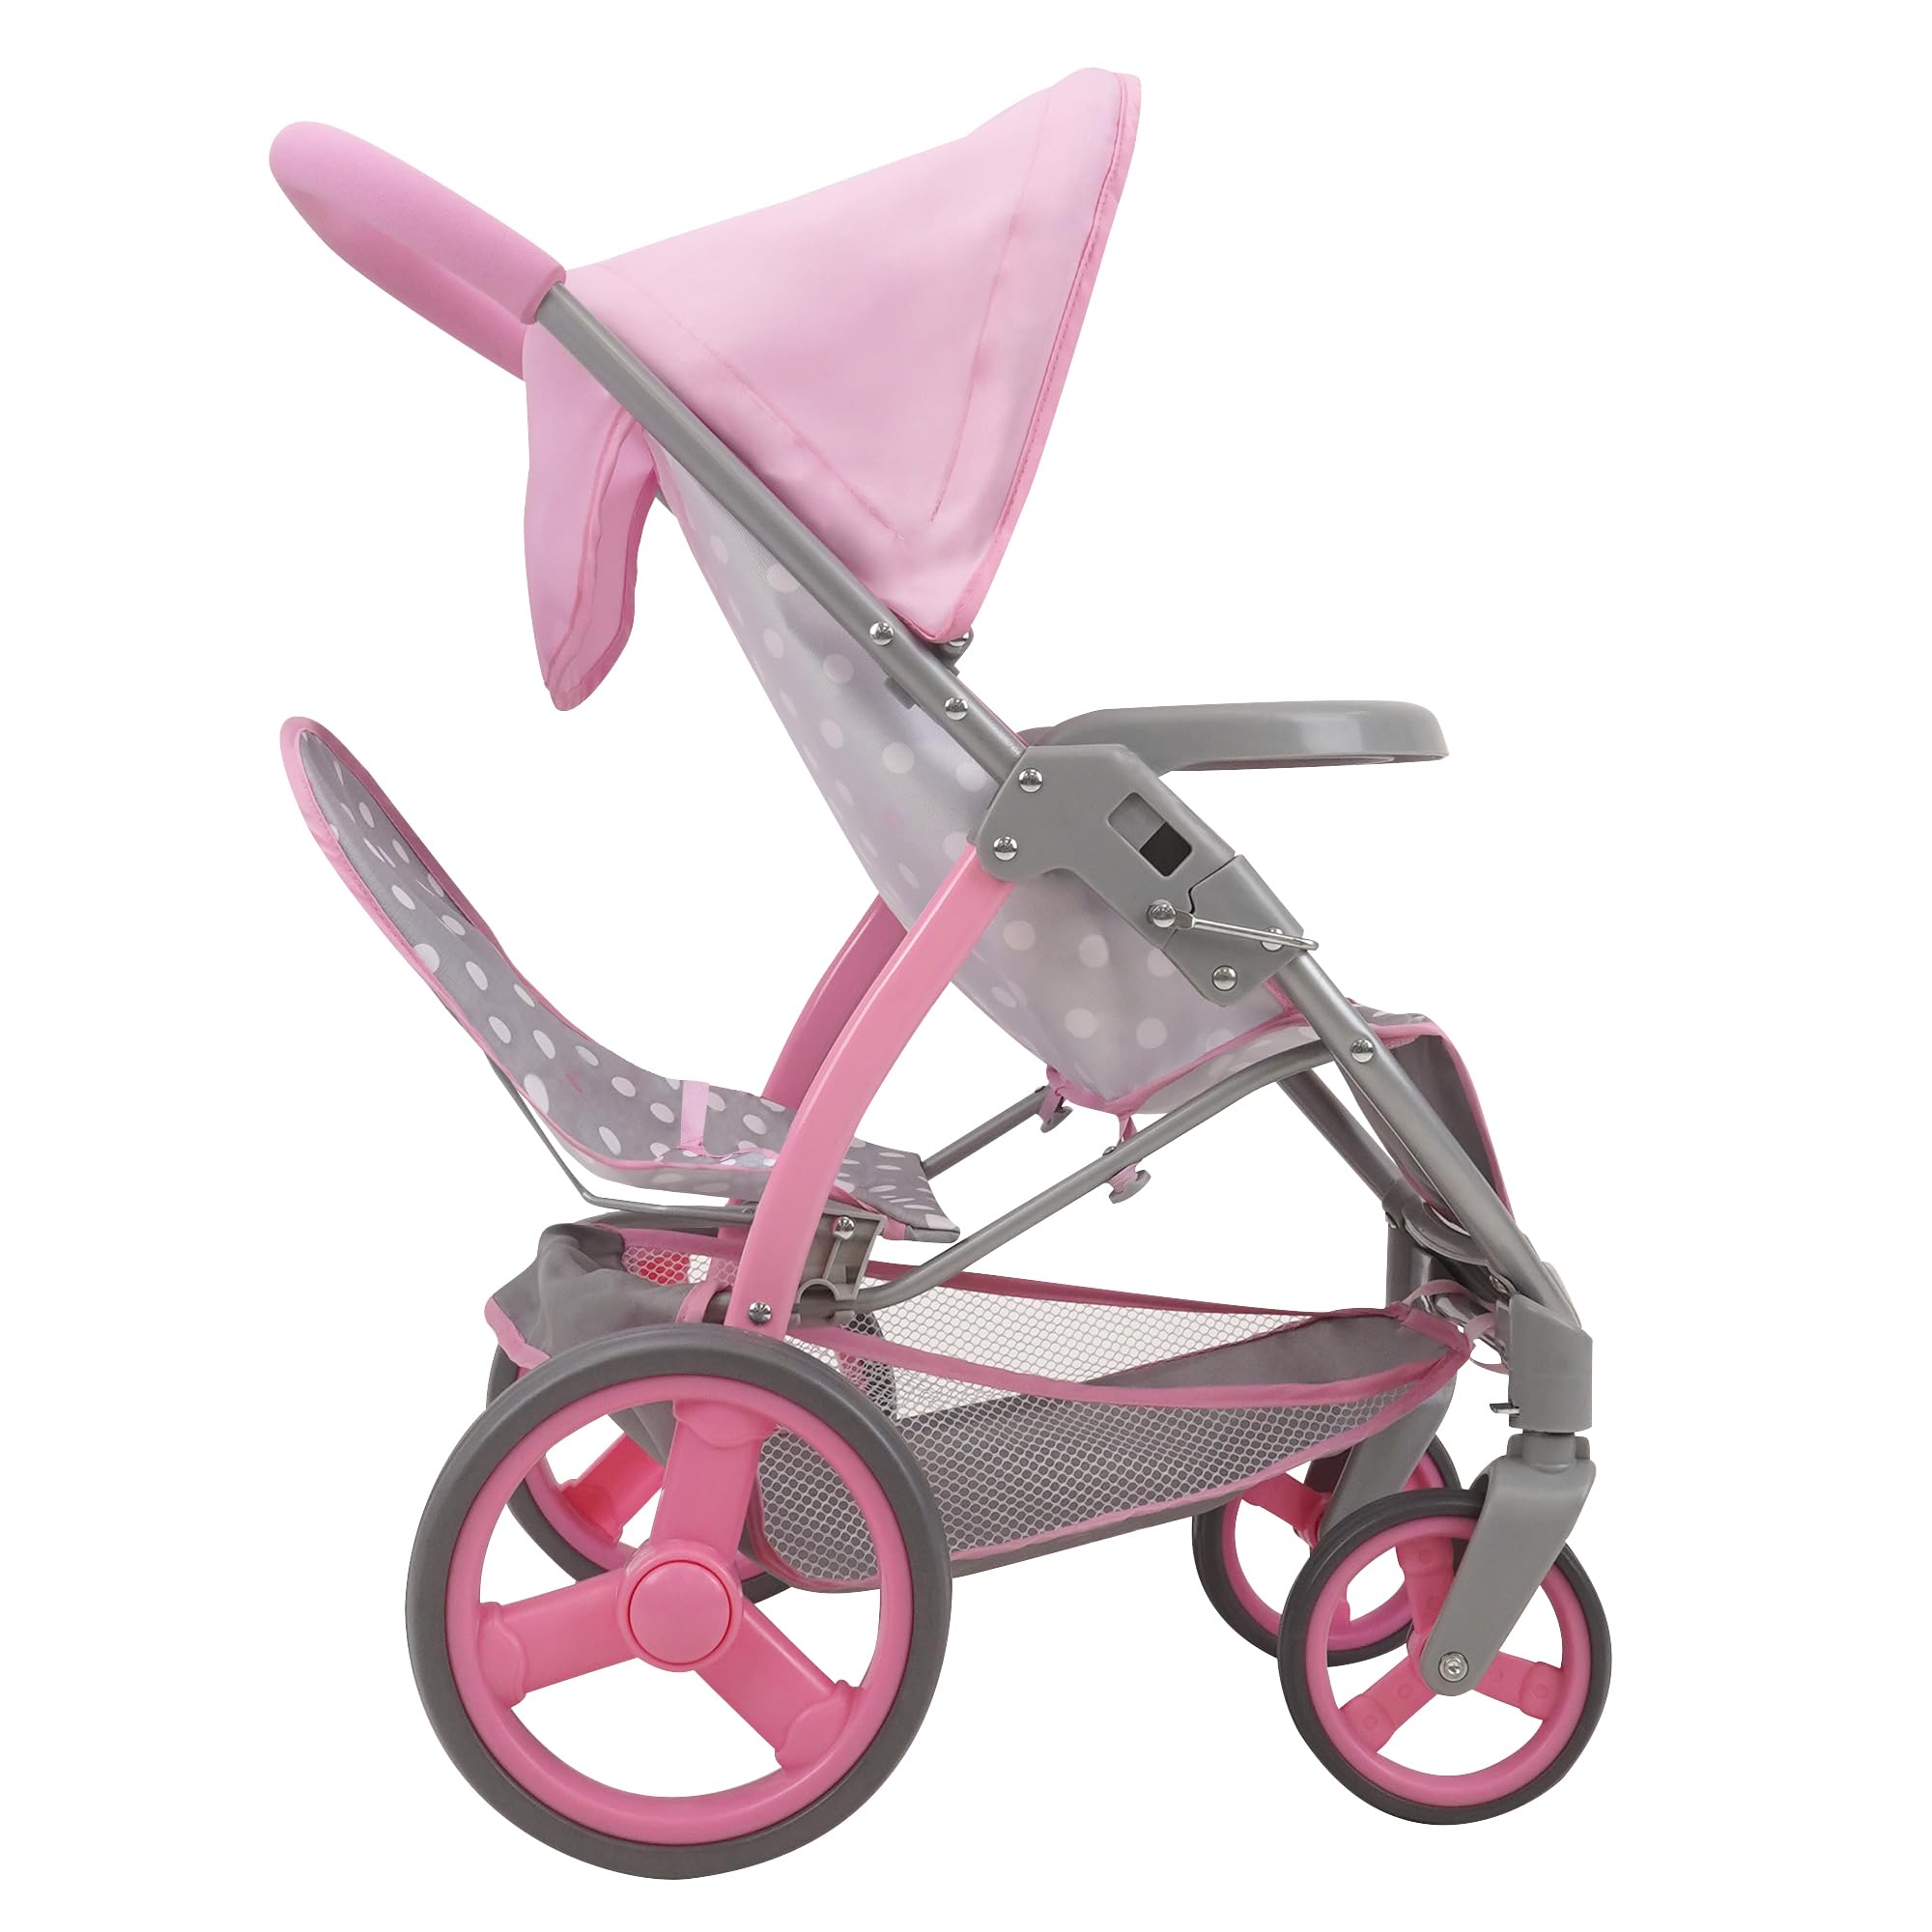 509 Crew: Cotton Candy Pink: Twin Tandem Doll Stroller - Pink, Grey, Polka Dot - Dolls Up to 18